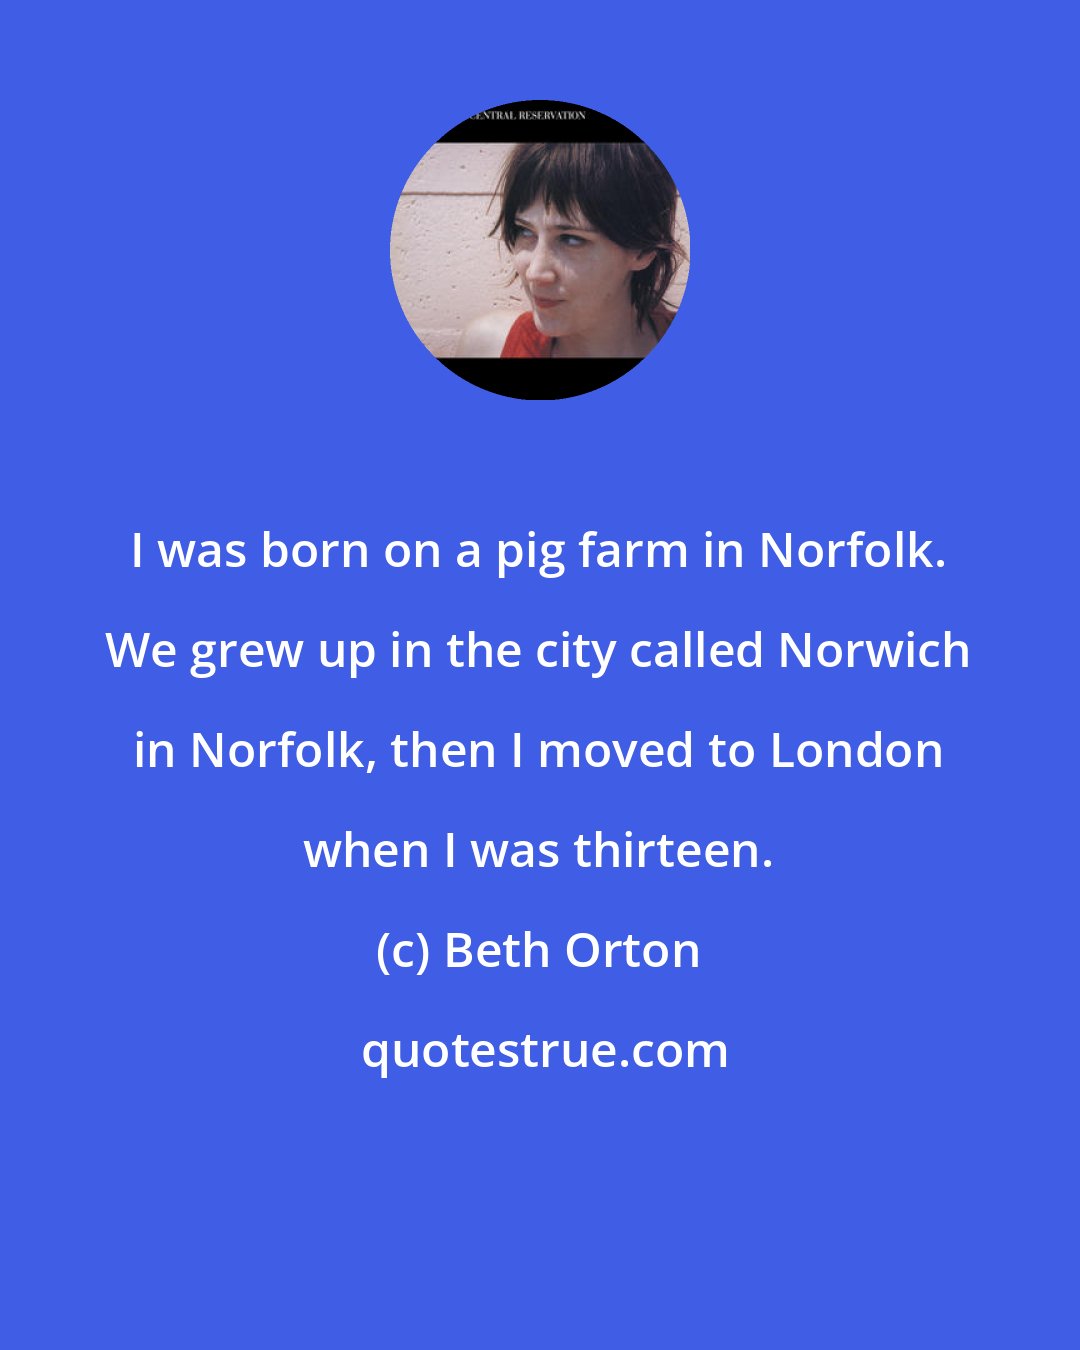 Beth Orton: I was born on a pig farm in Norfolk. We grew up in the city called Norwich in Norfolk, then I moved to London when I was thirteen.